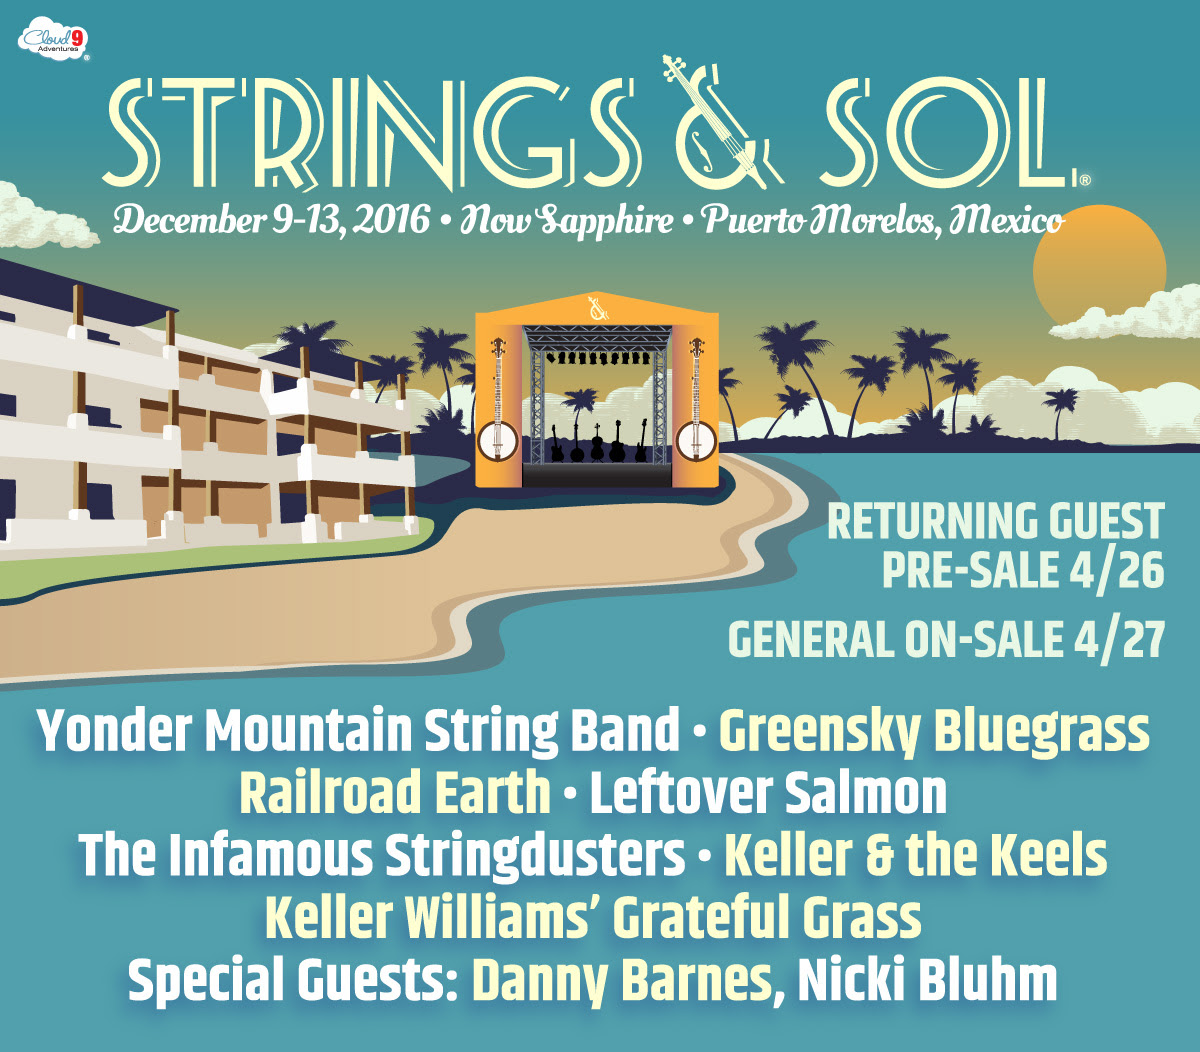 Strings & Sol 2016 acoustic lineup. Photo provided by: Strings & Sol